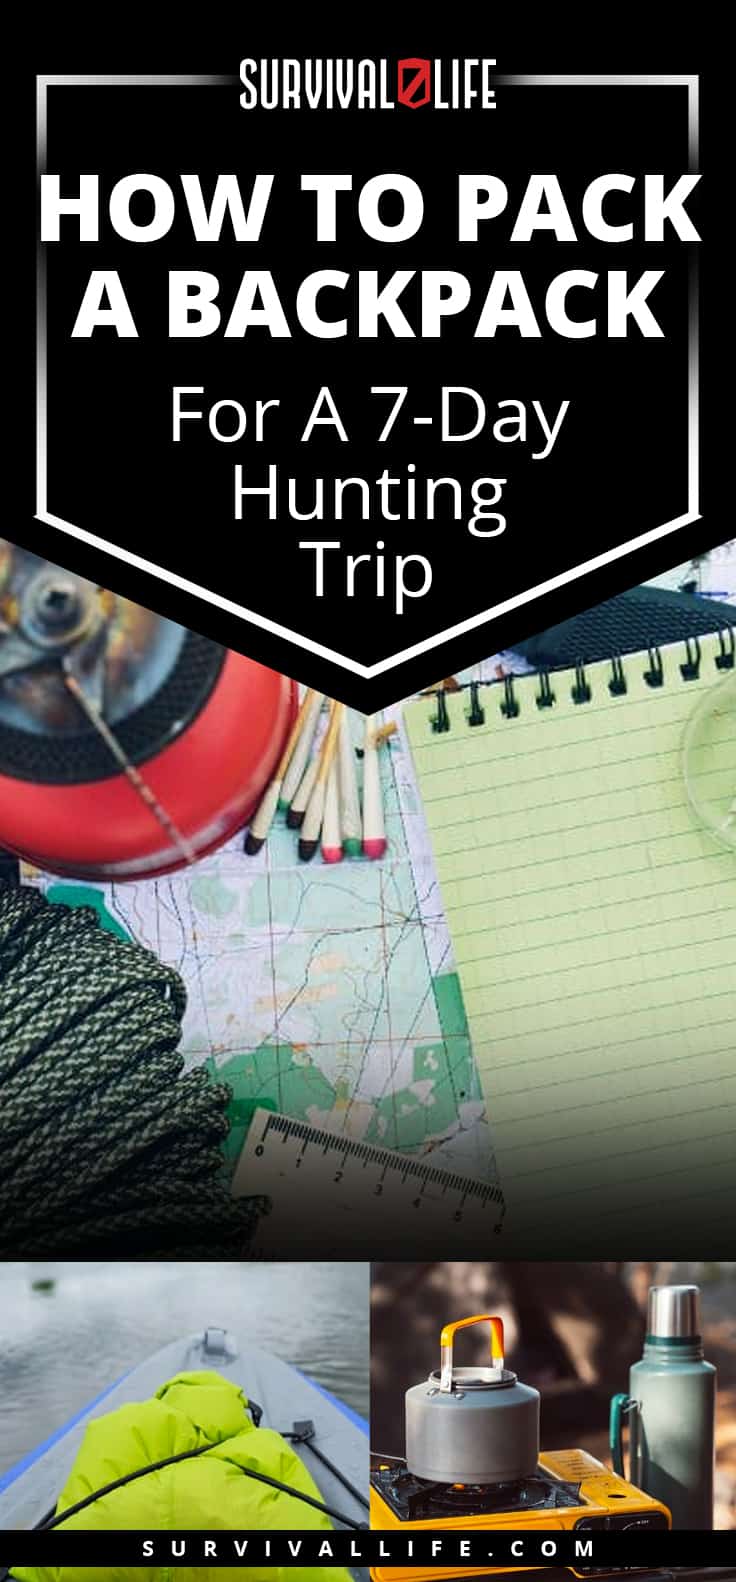 How To Pack A Backpack For A 7-Day Hunting Trip